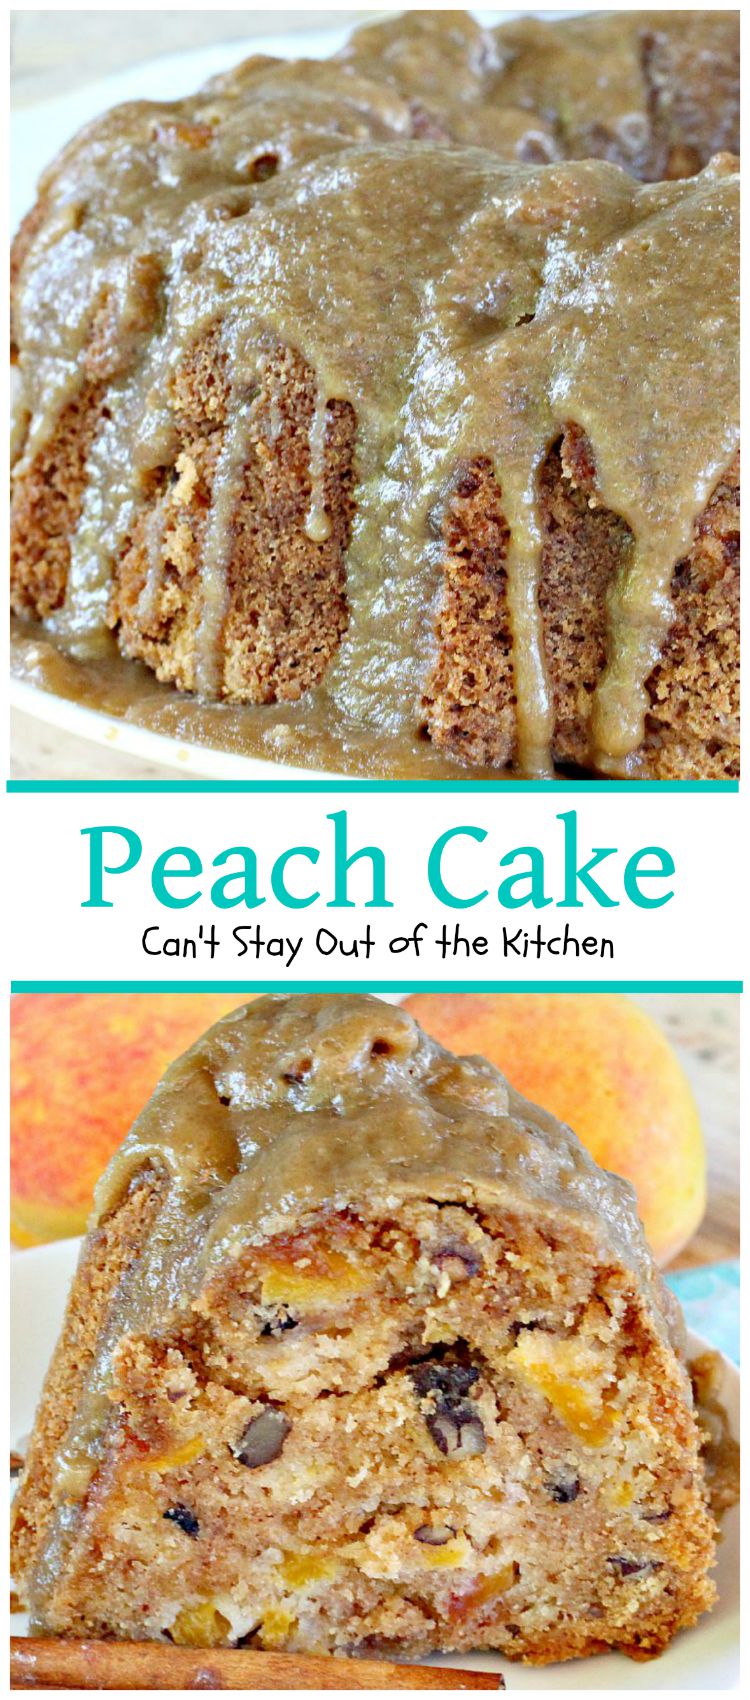 Peach Cake | Can't Stay Out of the KitchenPeach Cake | Can't Stay Out of the Kitchen